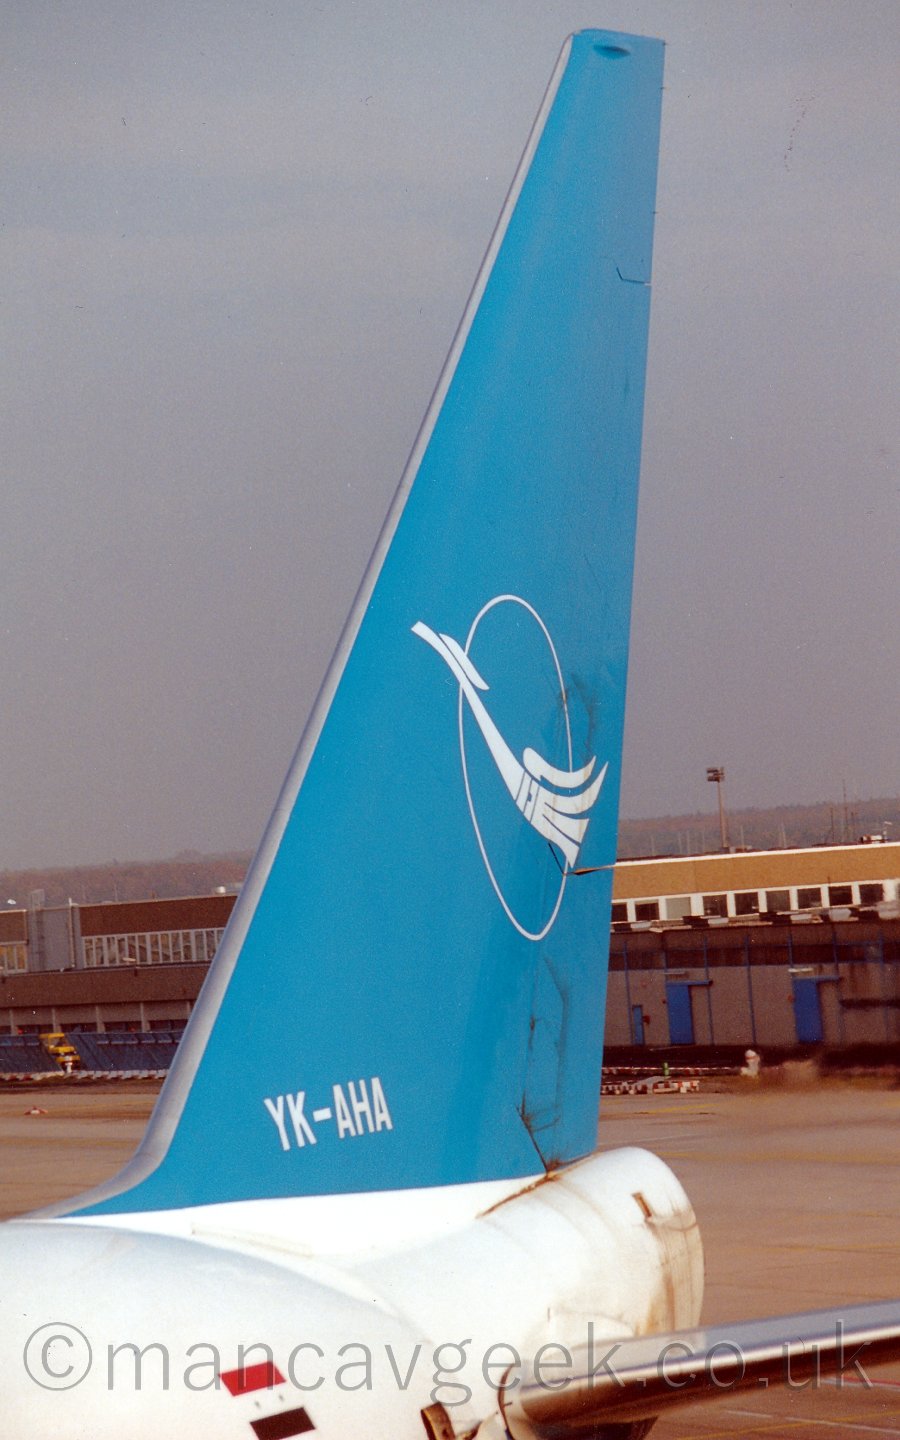 Closeup of the tail of a very large jet airliner parked on it's gate, facing to the left and towards the camera. The plane has a white body, with a sky blue tail carrying the image of a white bird flying past the outline of a white circle. The registration "YK-AHA" is on the base of the tail, painted in white. In the background, airport buildings fill the lower half of the image, with grey sky filling the rest.